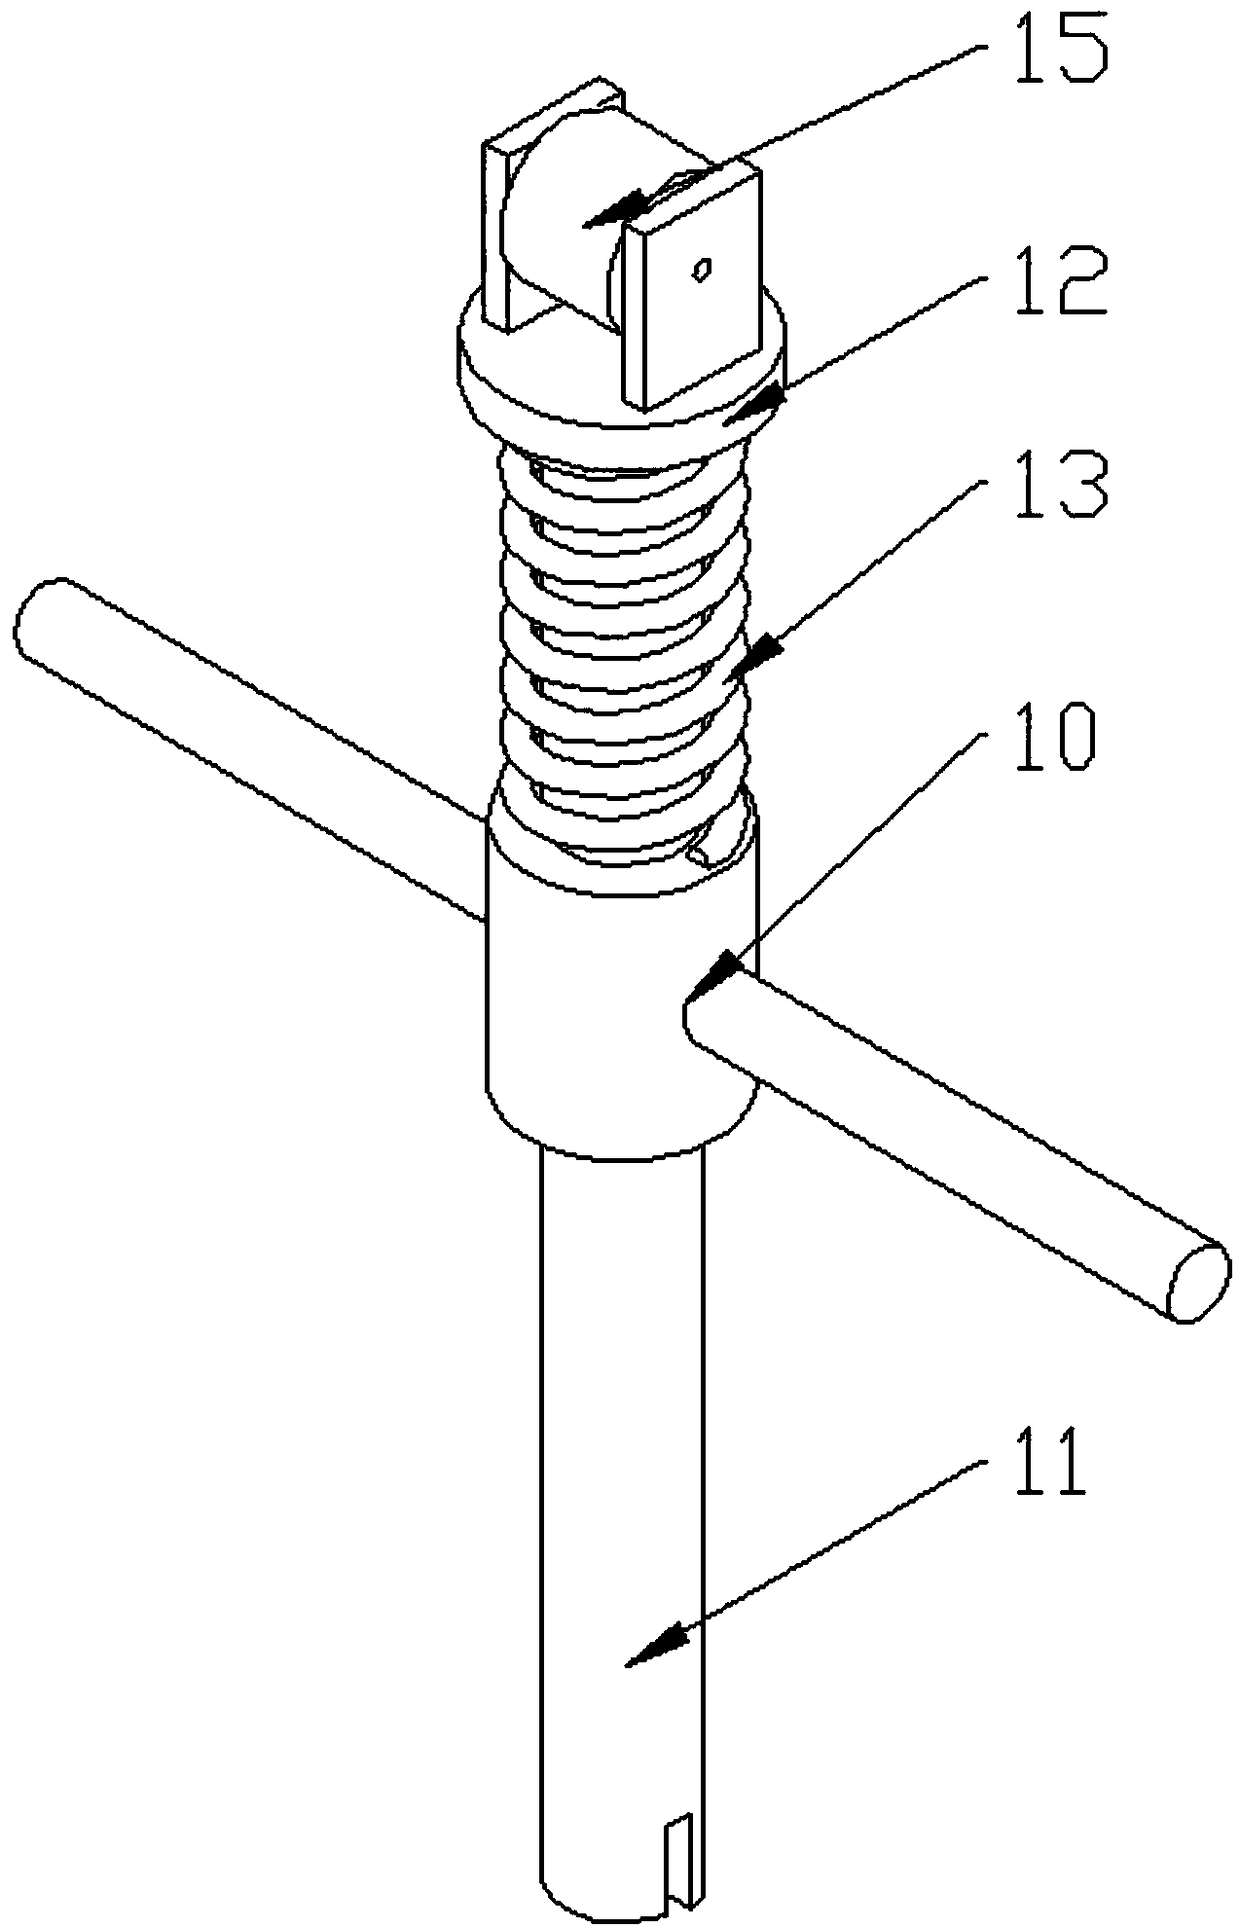 Adjustable single-drive tapered tooth cutting device